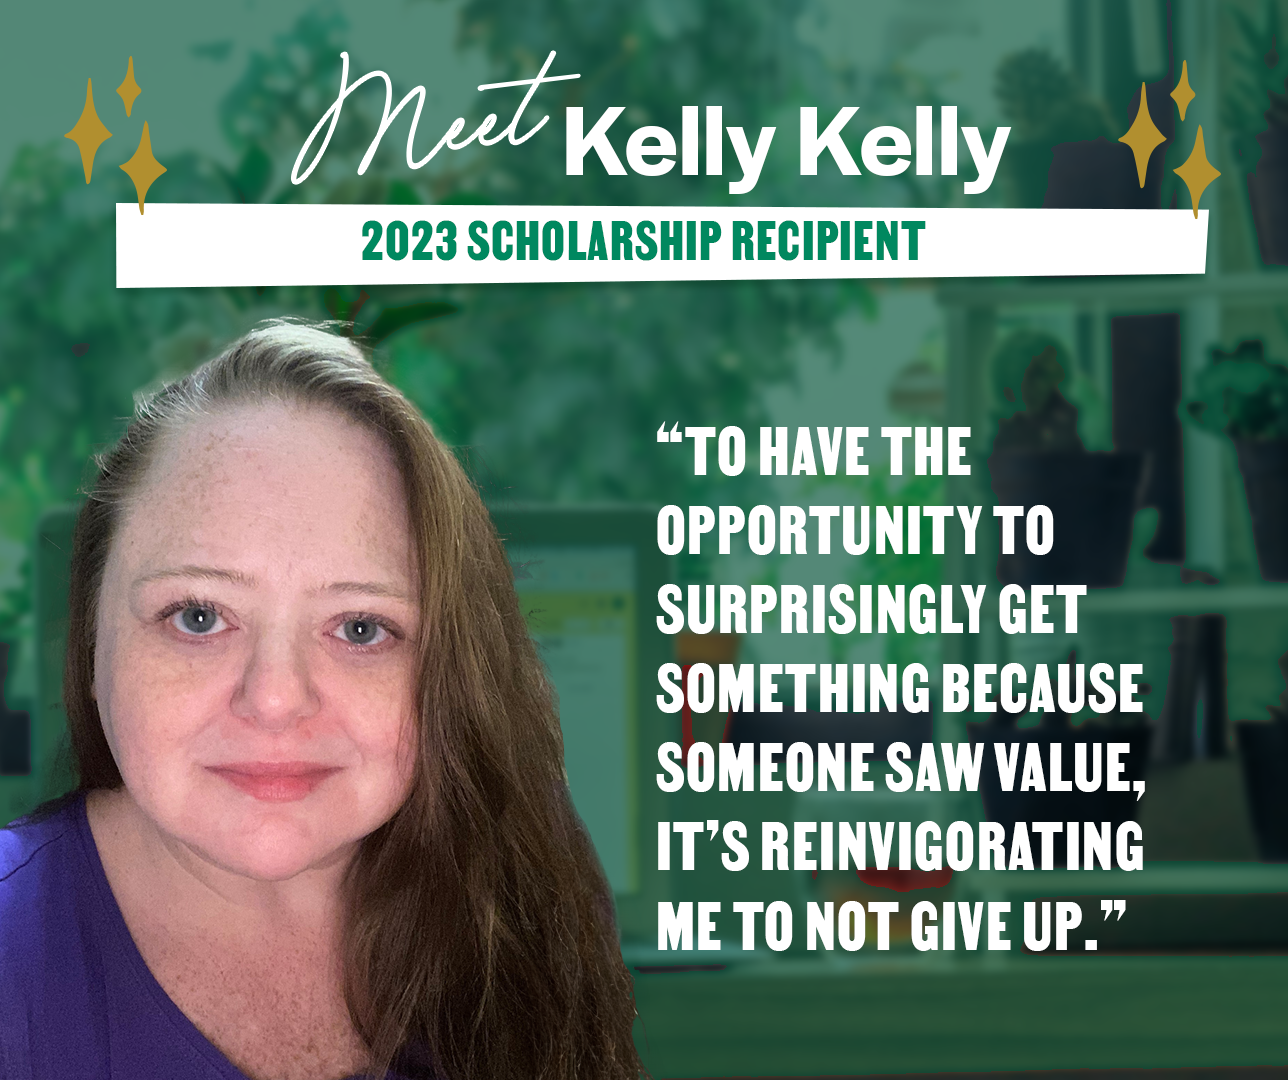 Meet Kelly Kelly: 2023 Scholarship Recipient 'To have the opportunity to surprisingly get something because someone saw value, it's reinvigorating me to not give up.'